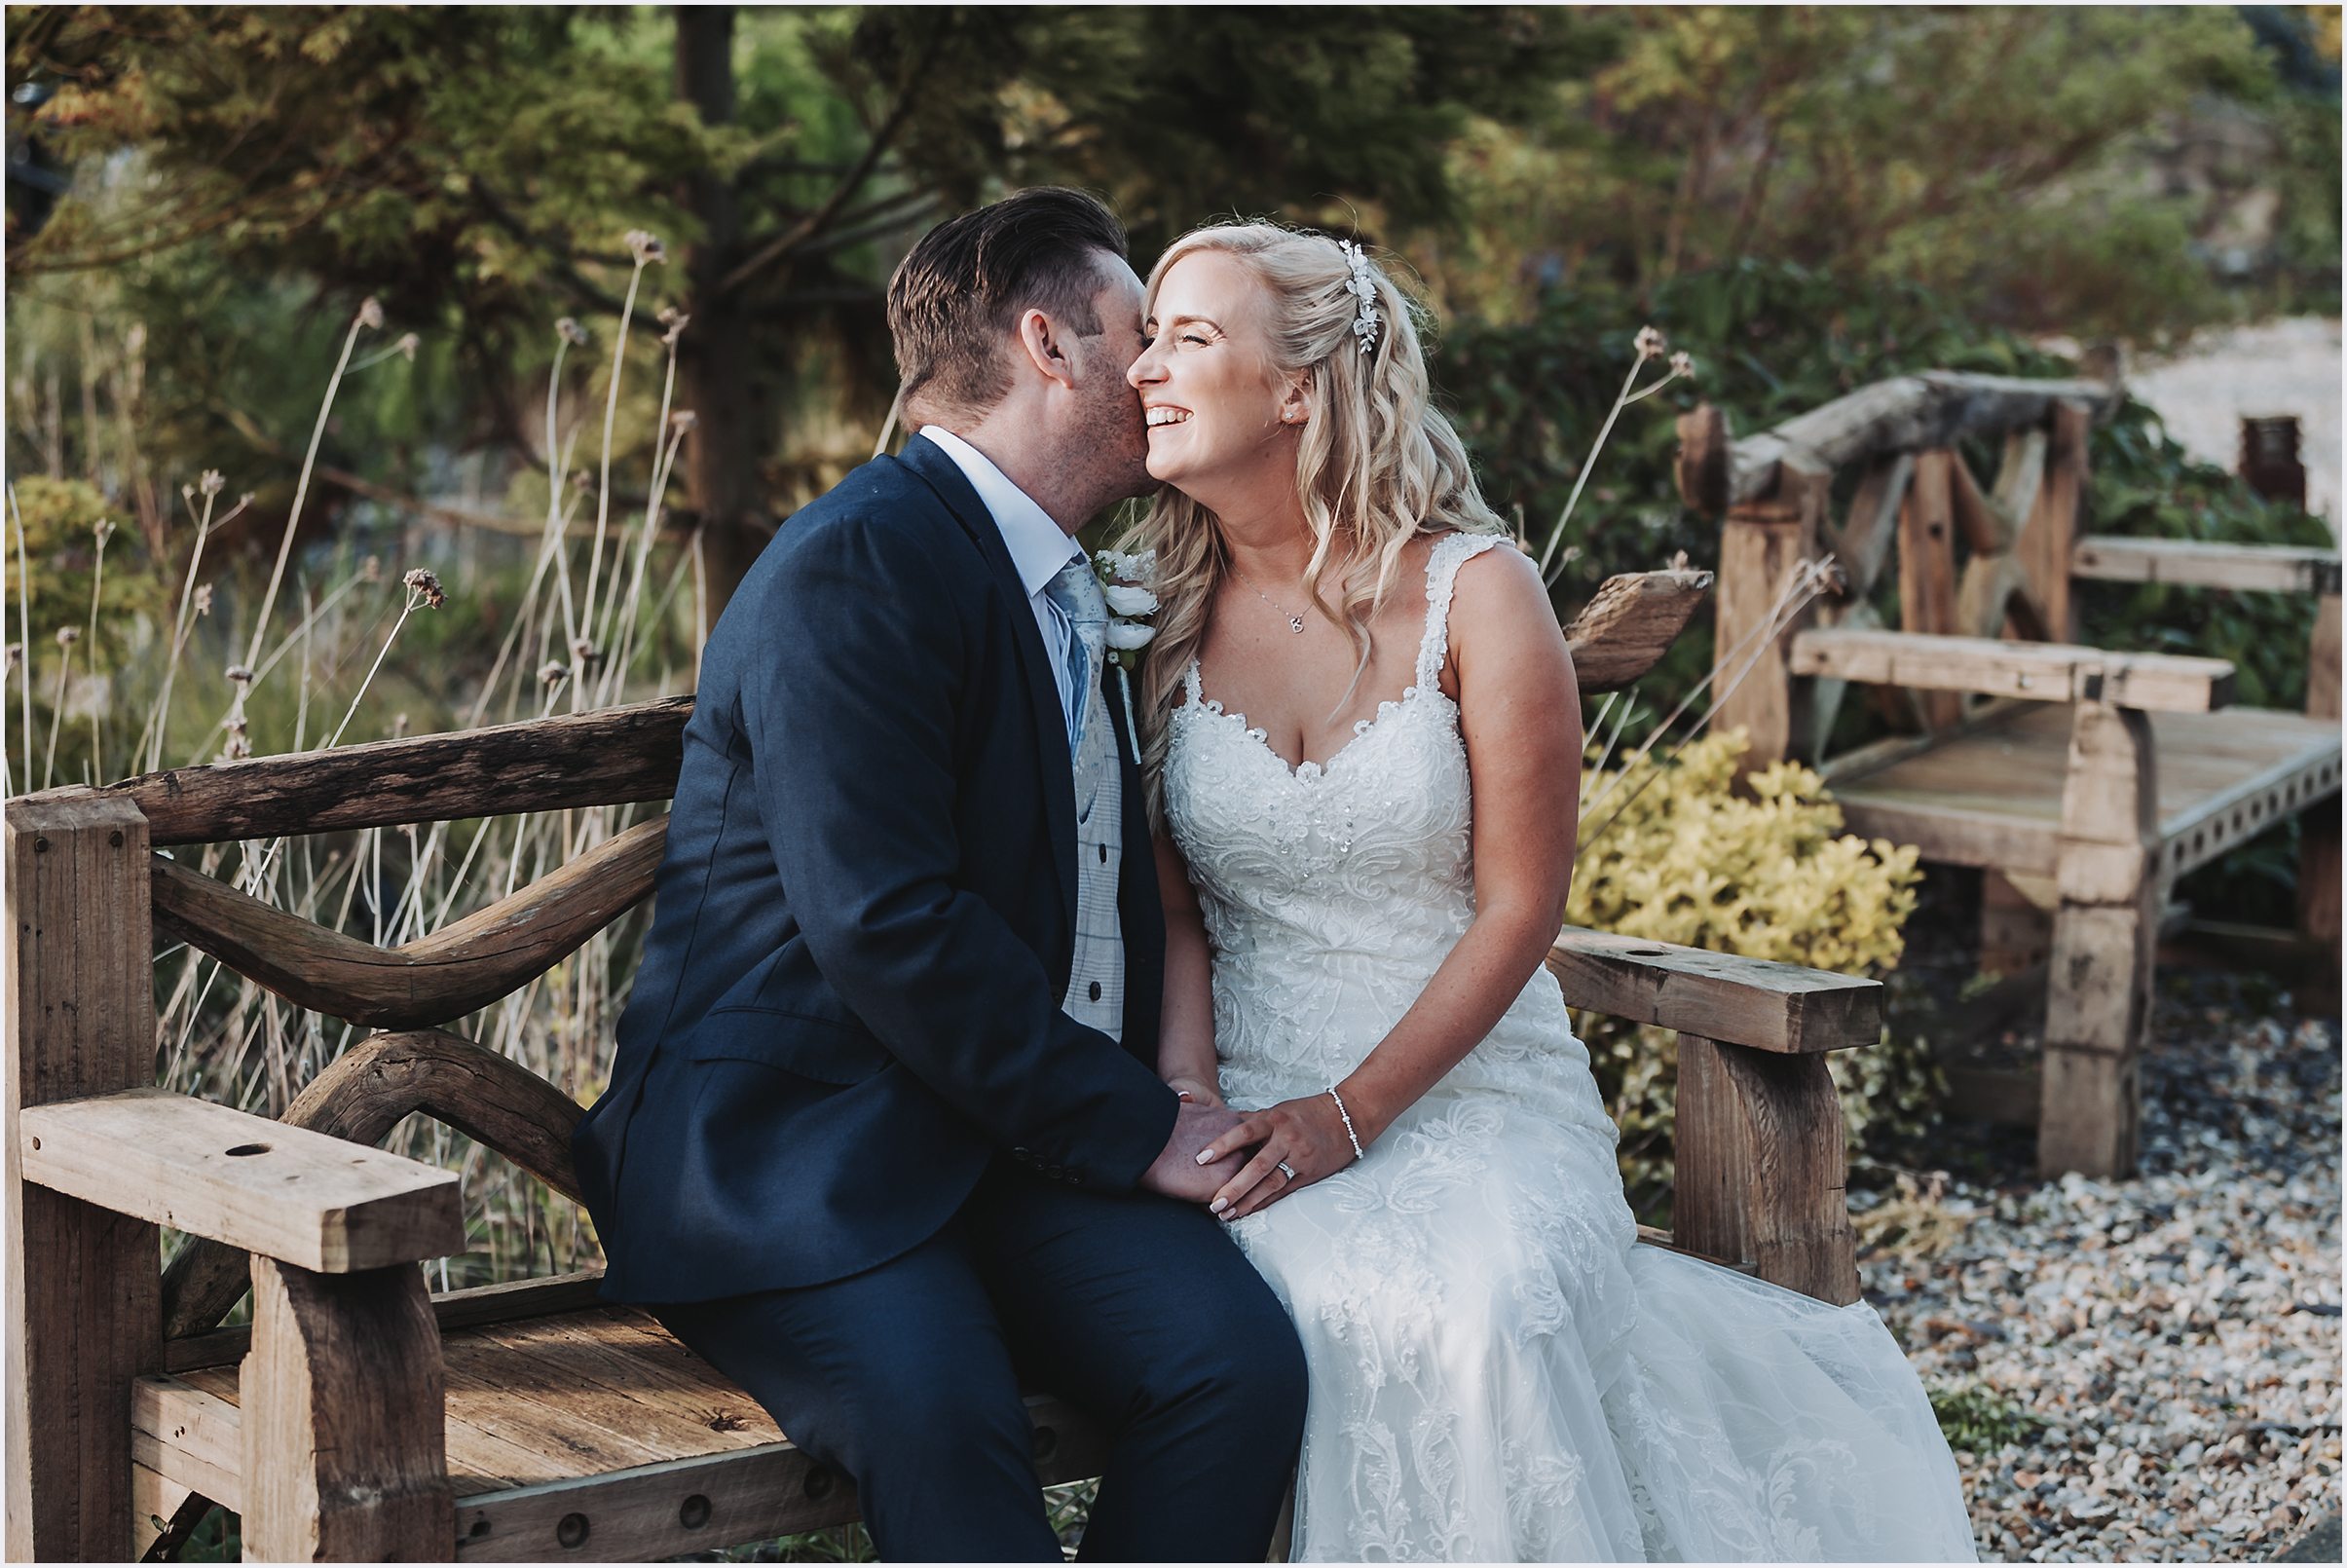 A groom is whispering into his new wife's ear making her laugh while sitting on a rustic wooden bench in the Japanese Gardens at The Grosvenor Pulford Hotel and Spa